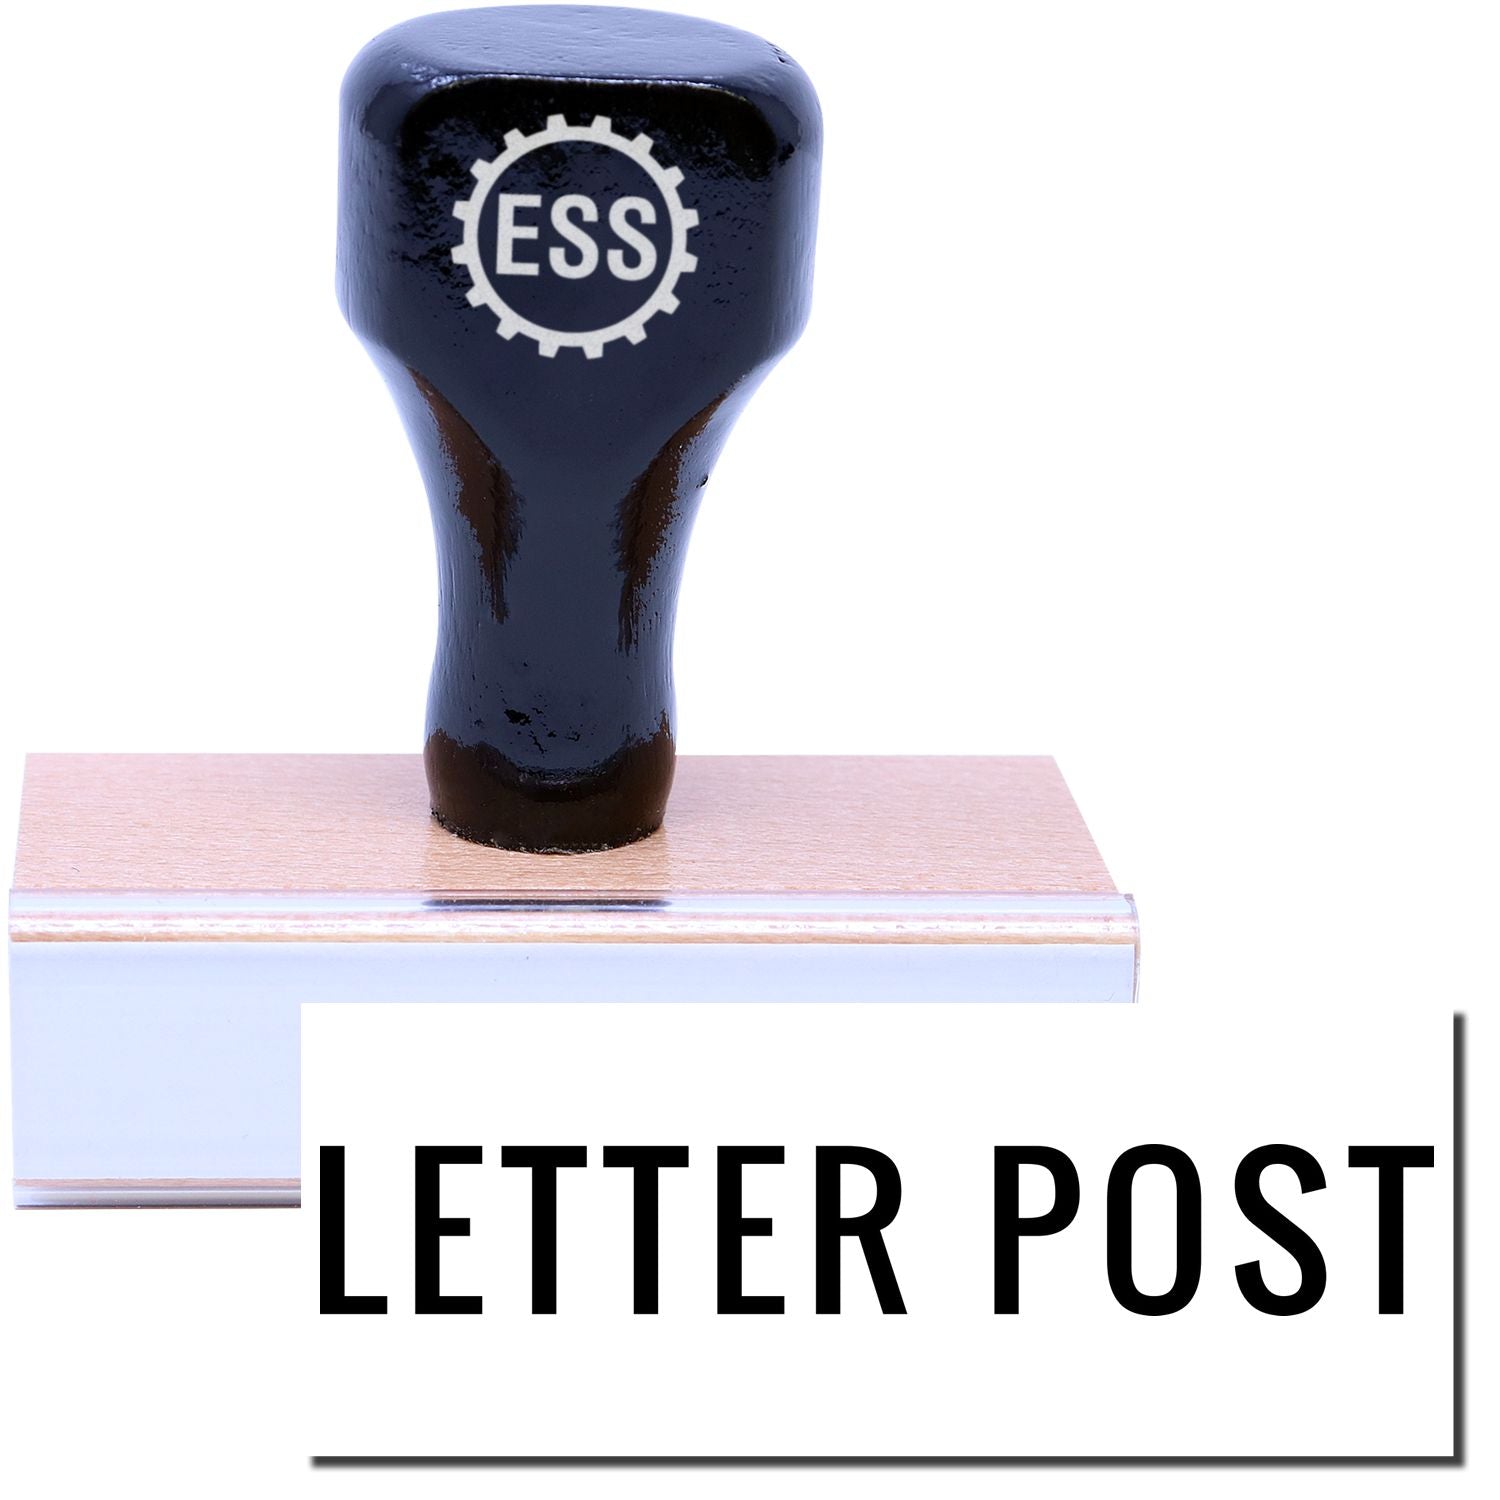 A stock office rubber stamp with a stamped image showing how the text "LETTER POST" is displayed after stamping.